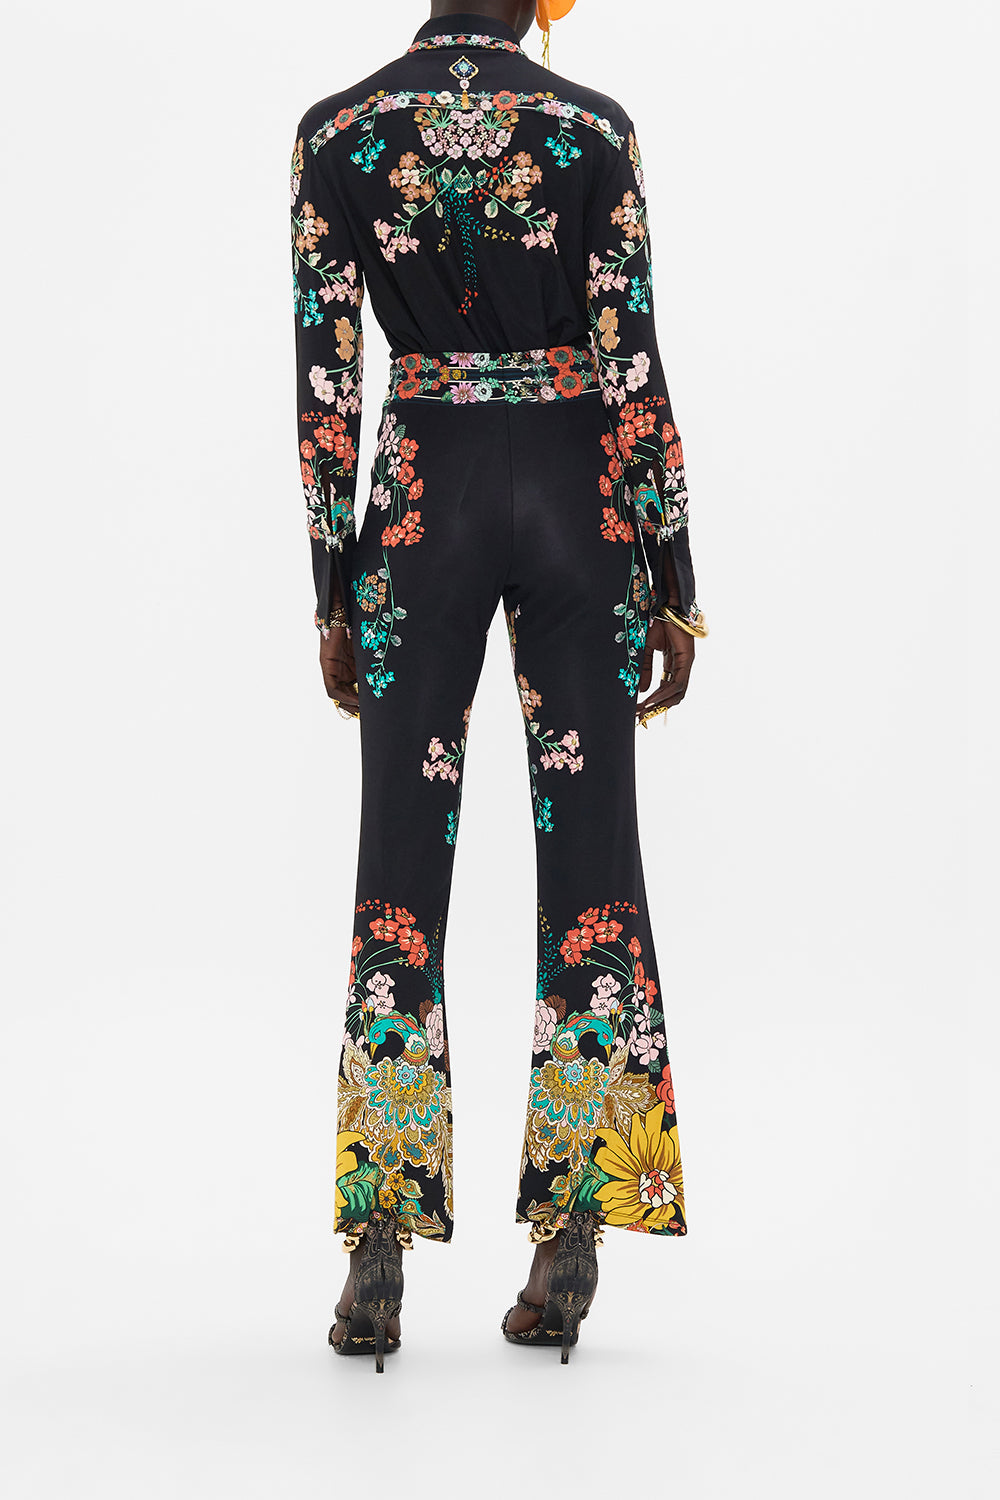 CAMILLA jersey pants in We Wore Folklore print